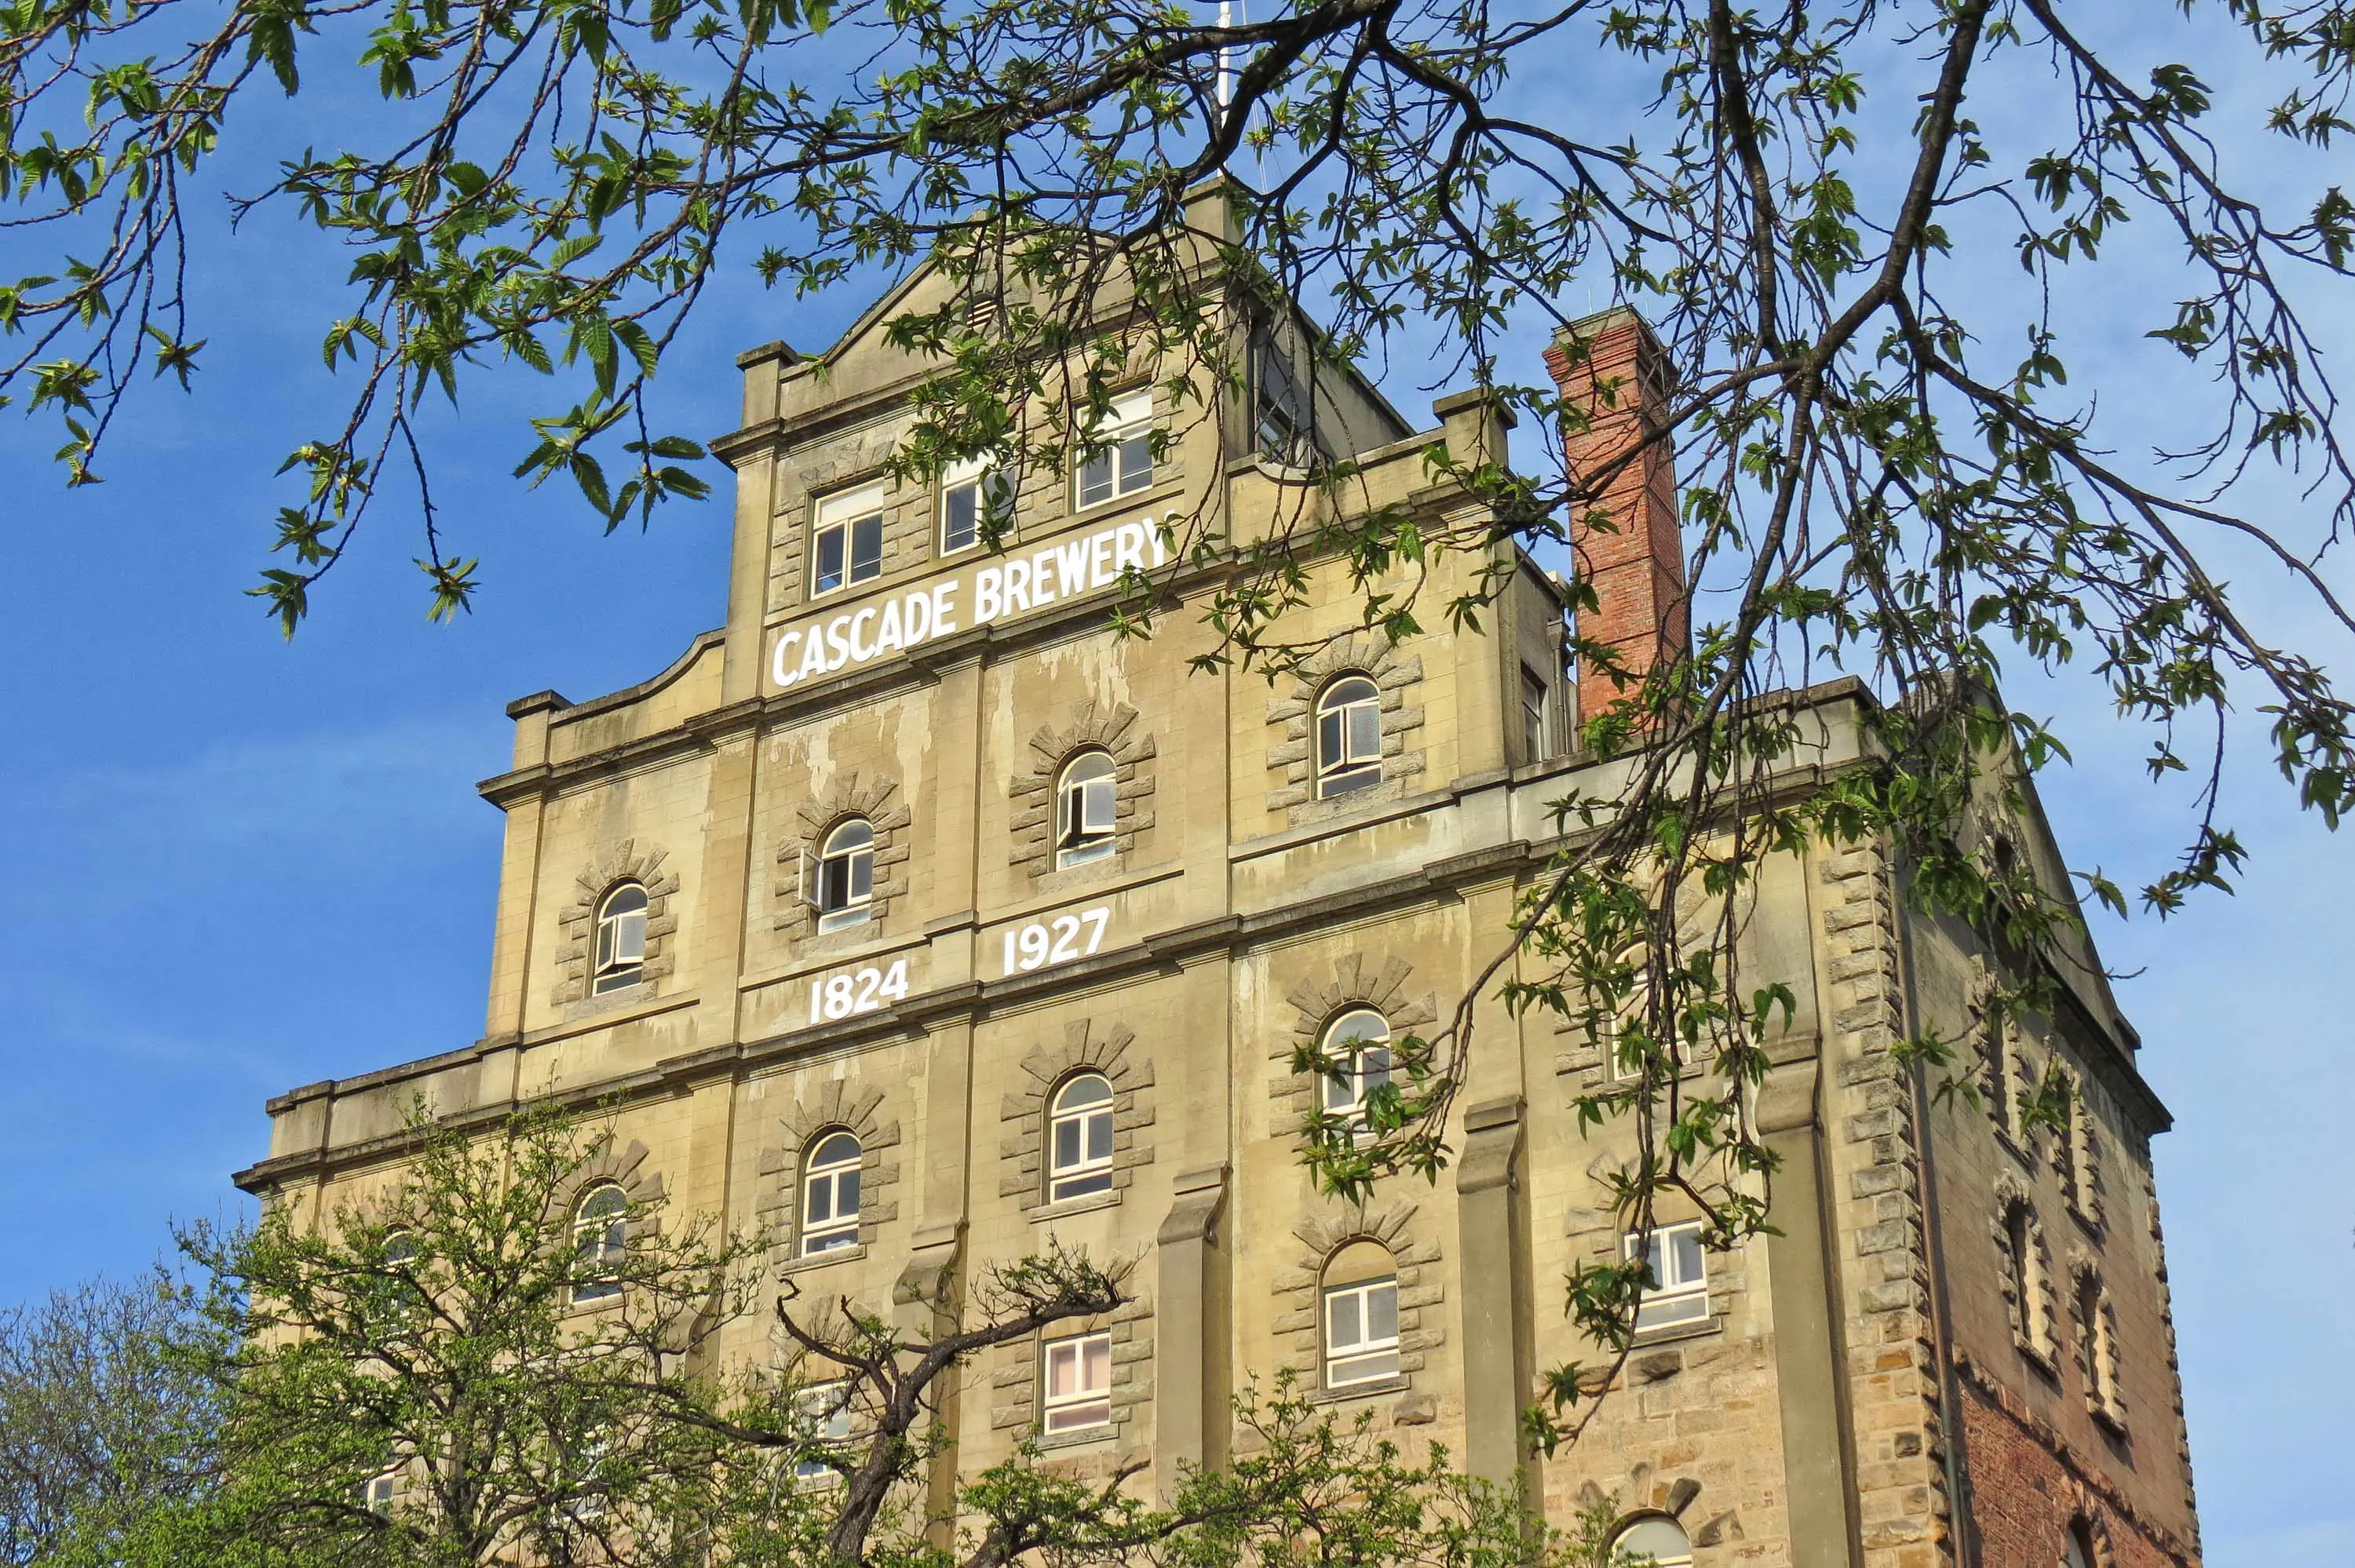 An old, multi-story, sandstone building stands above trees.